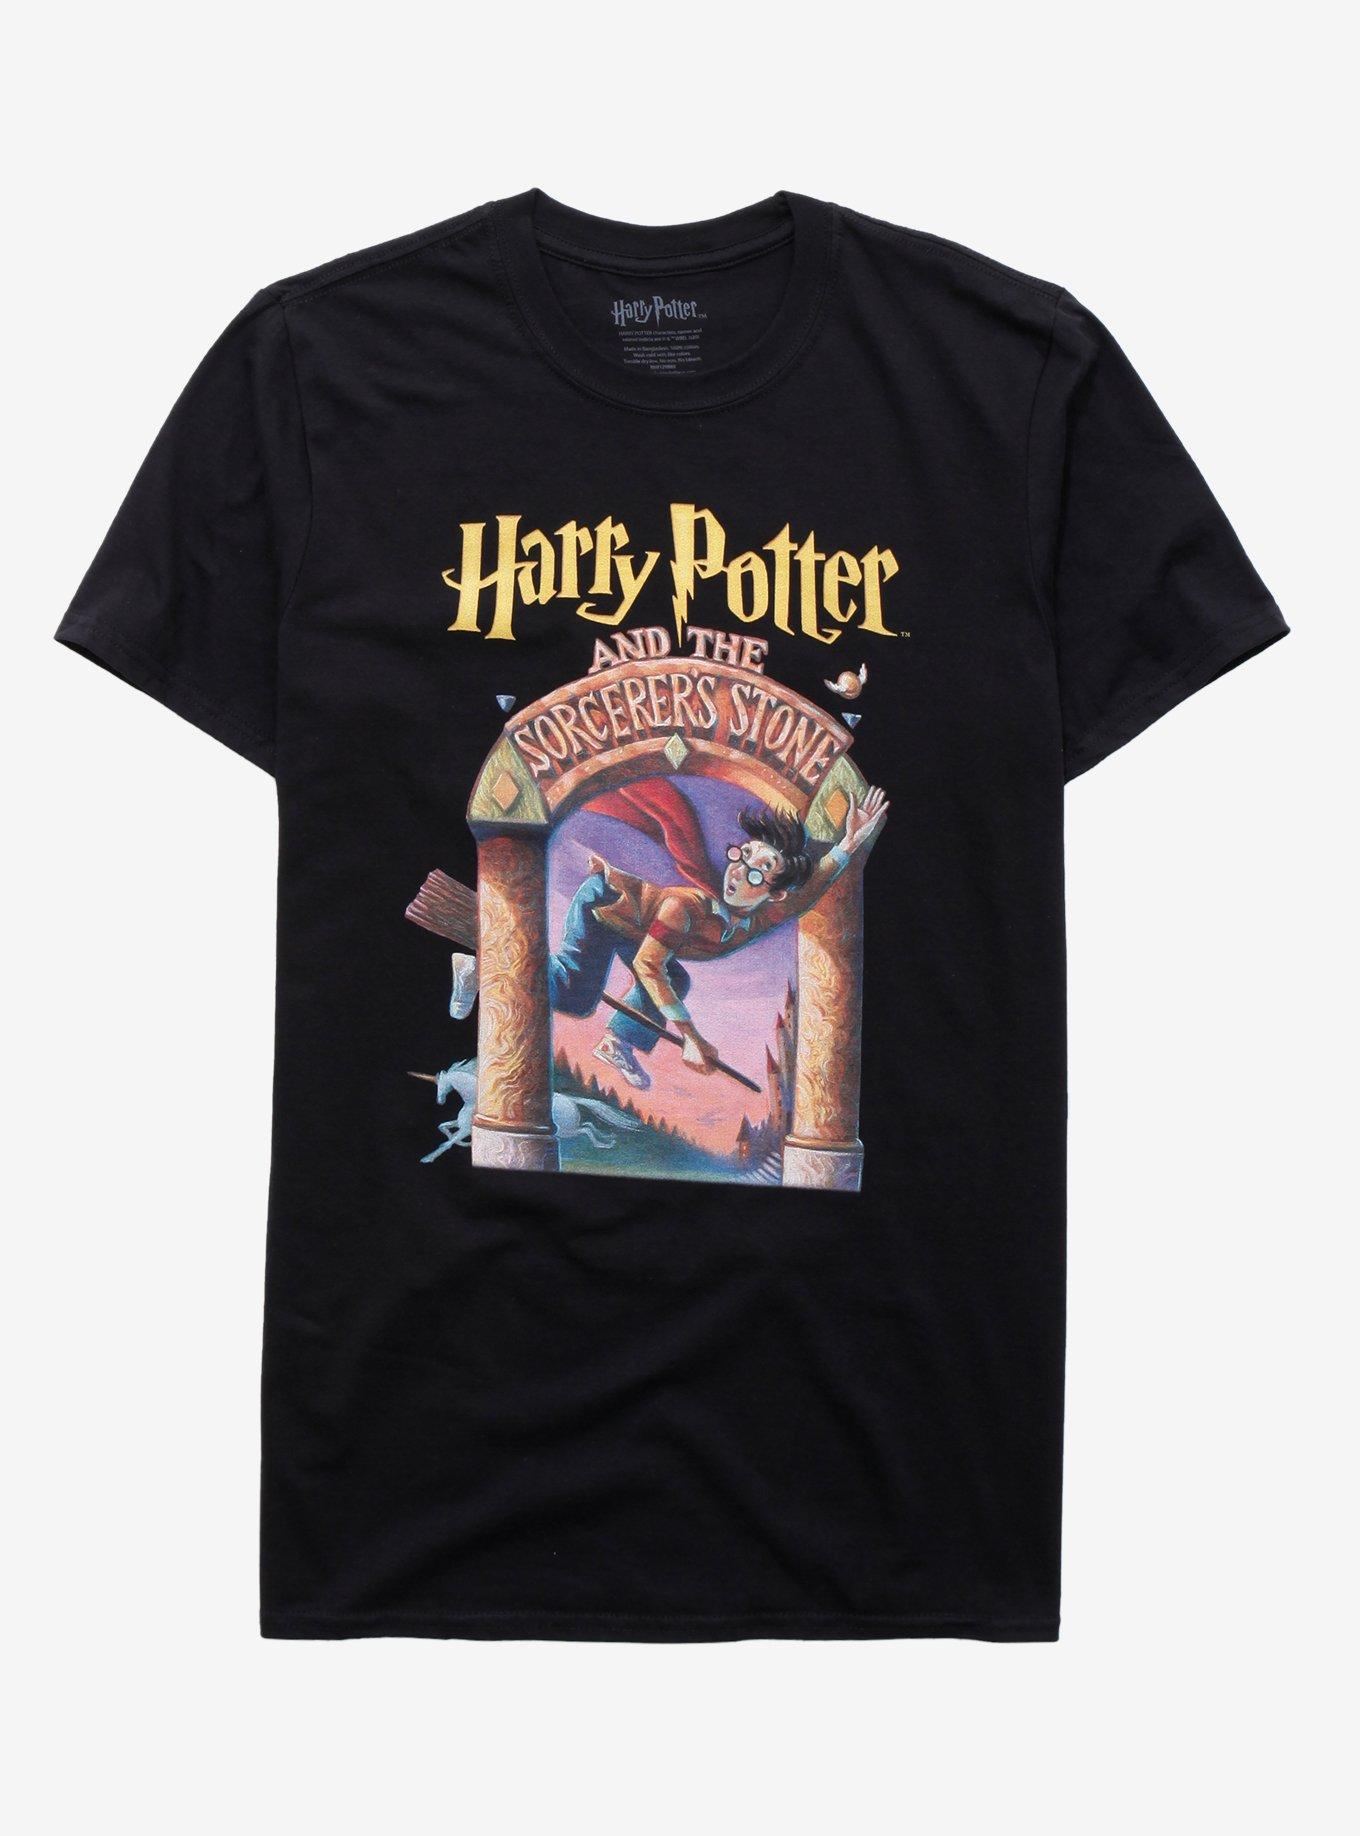 Harry Potter And The Sorcerer's Stone Book Cover T-Shirt, BLACK, hi-res